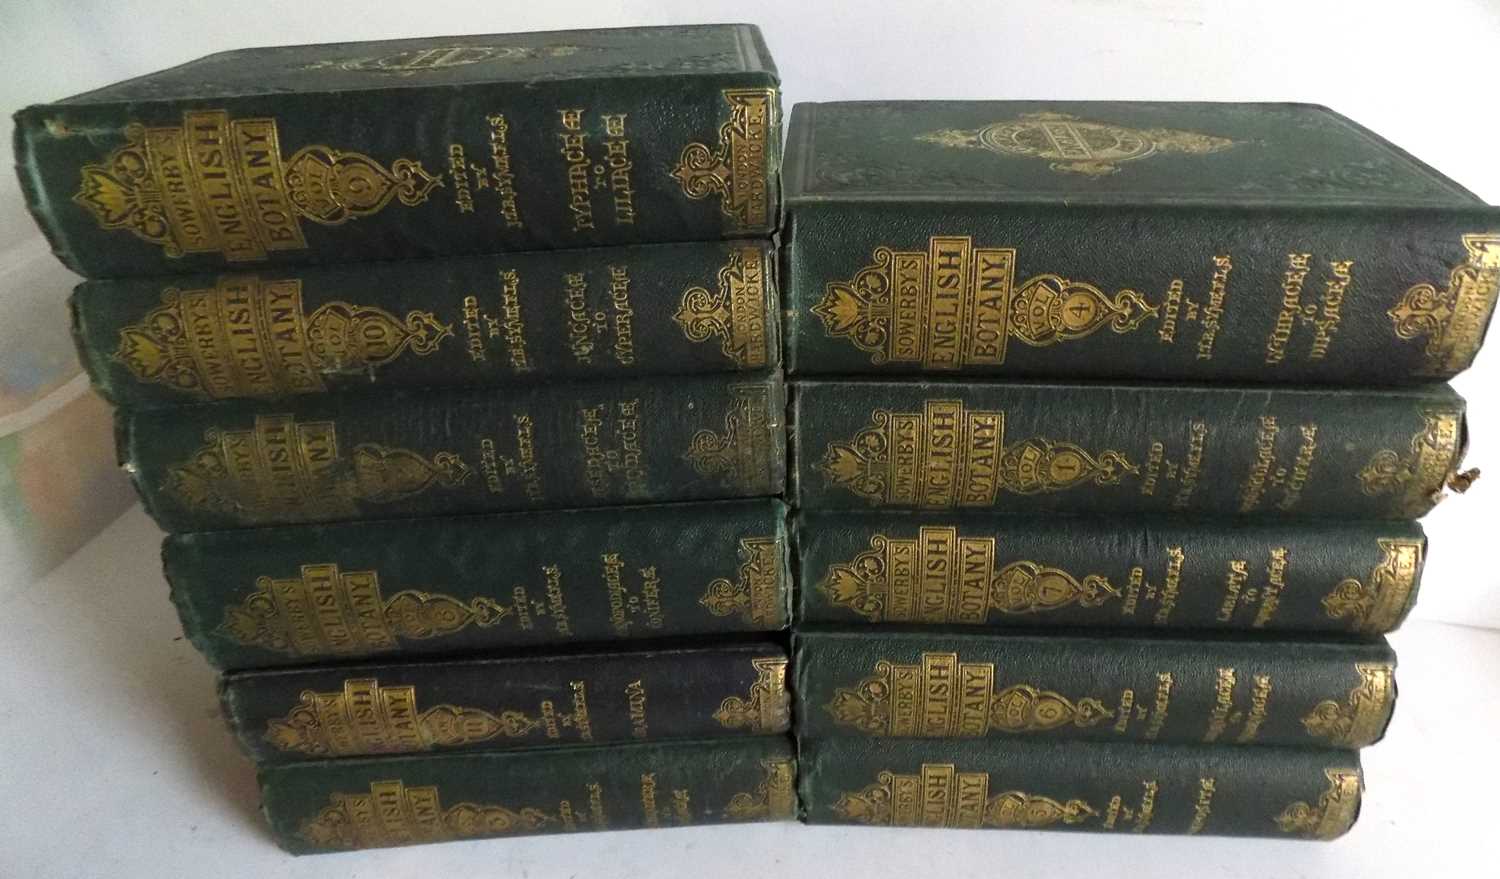 JOHN T. BOSWELL SYME. "English Botany, or, Coloured Figures of British Plants." Eleven Vols